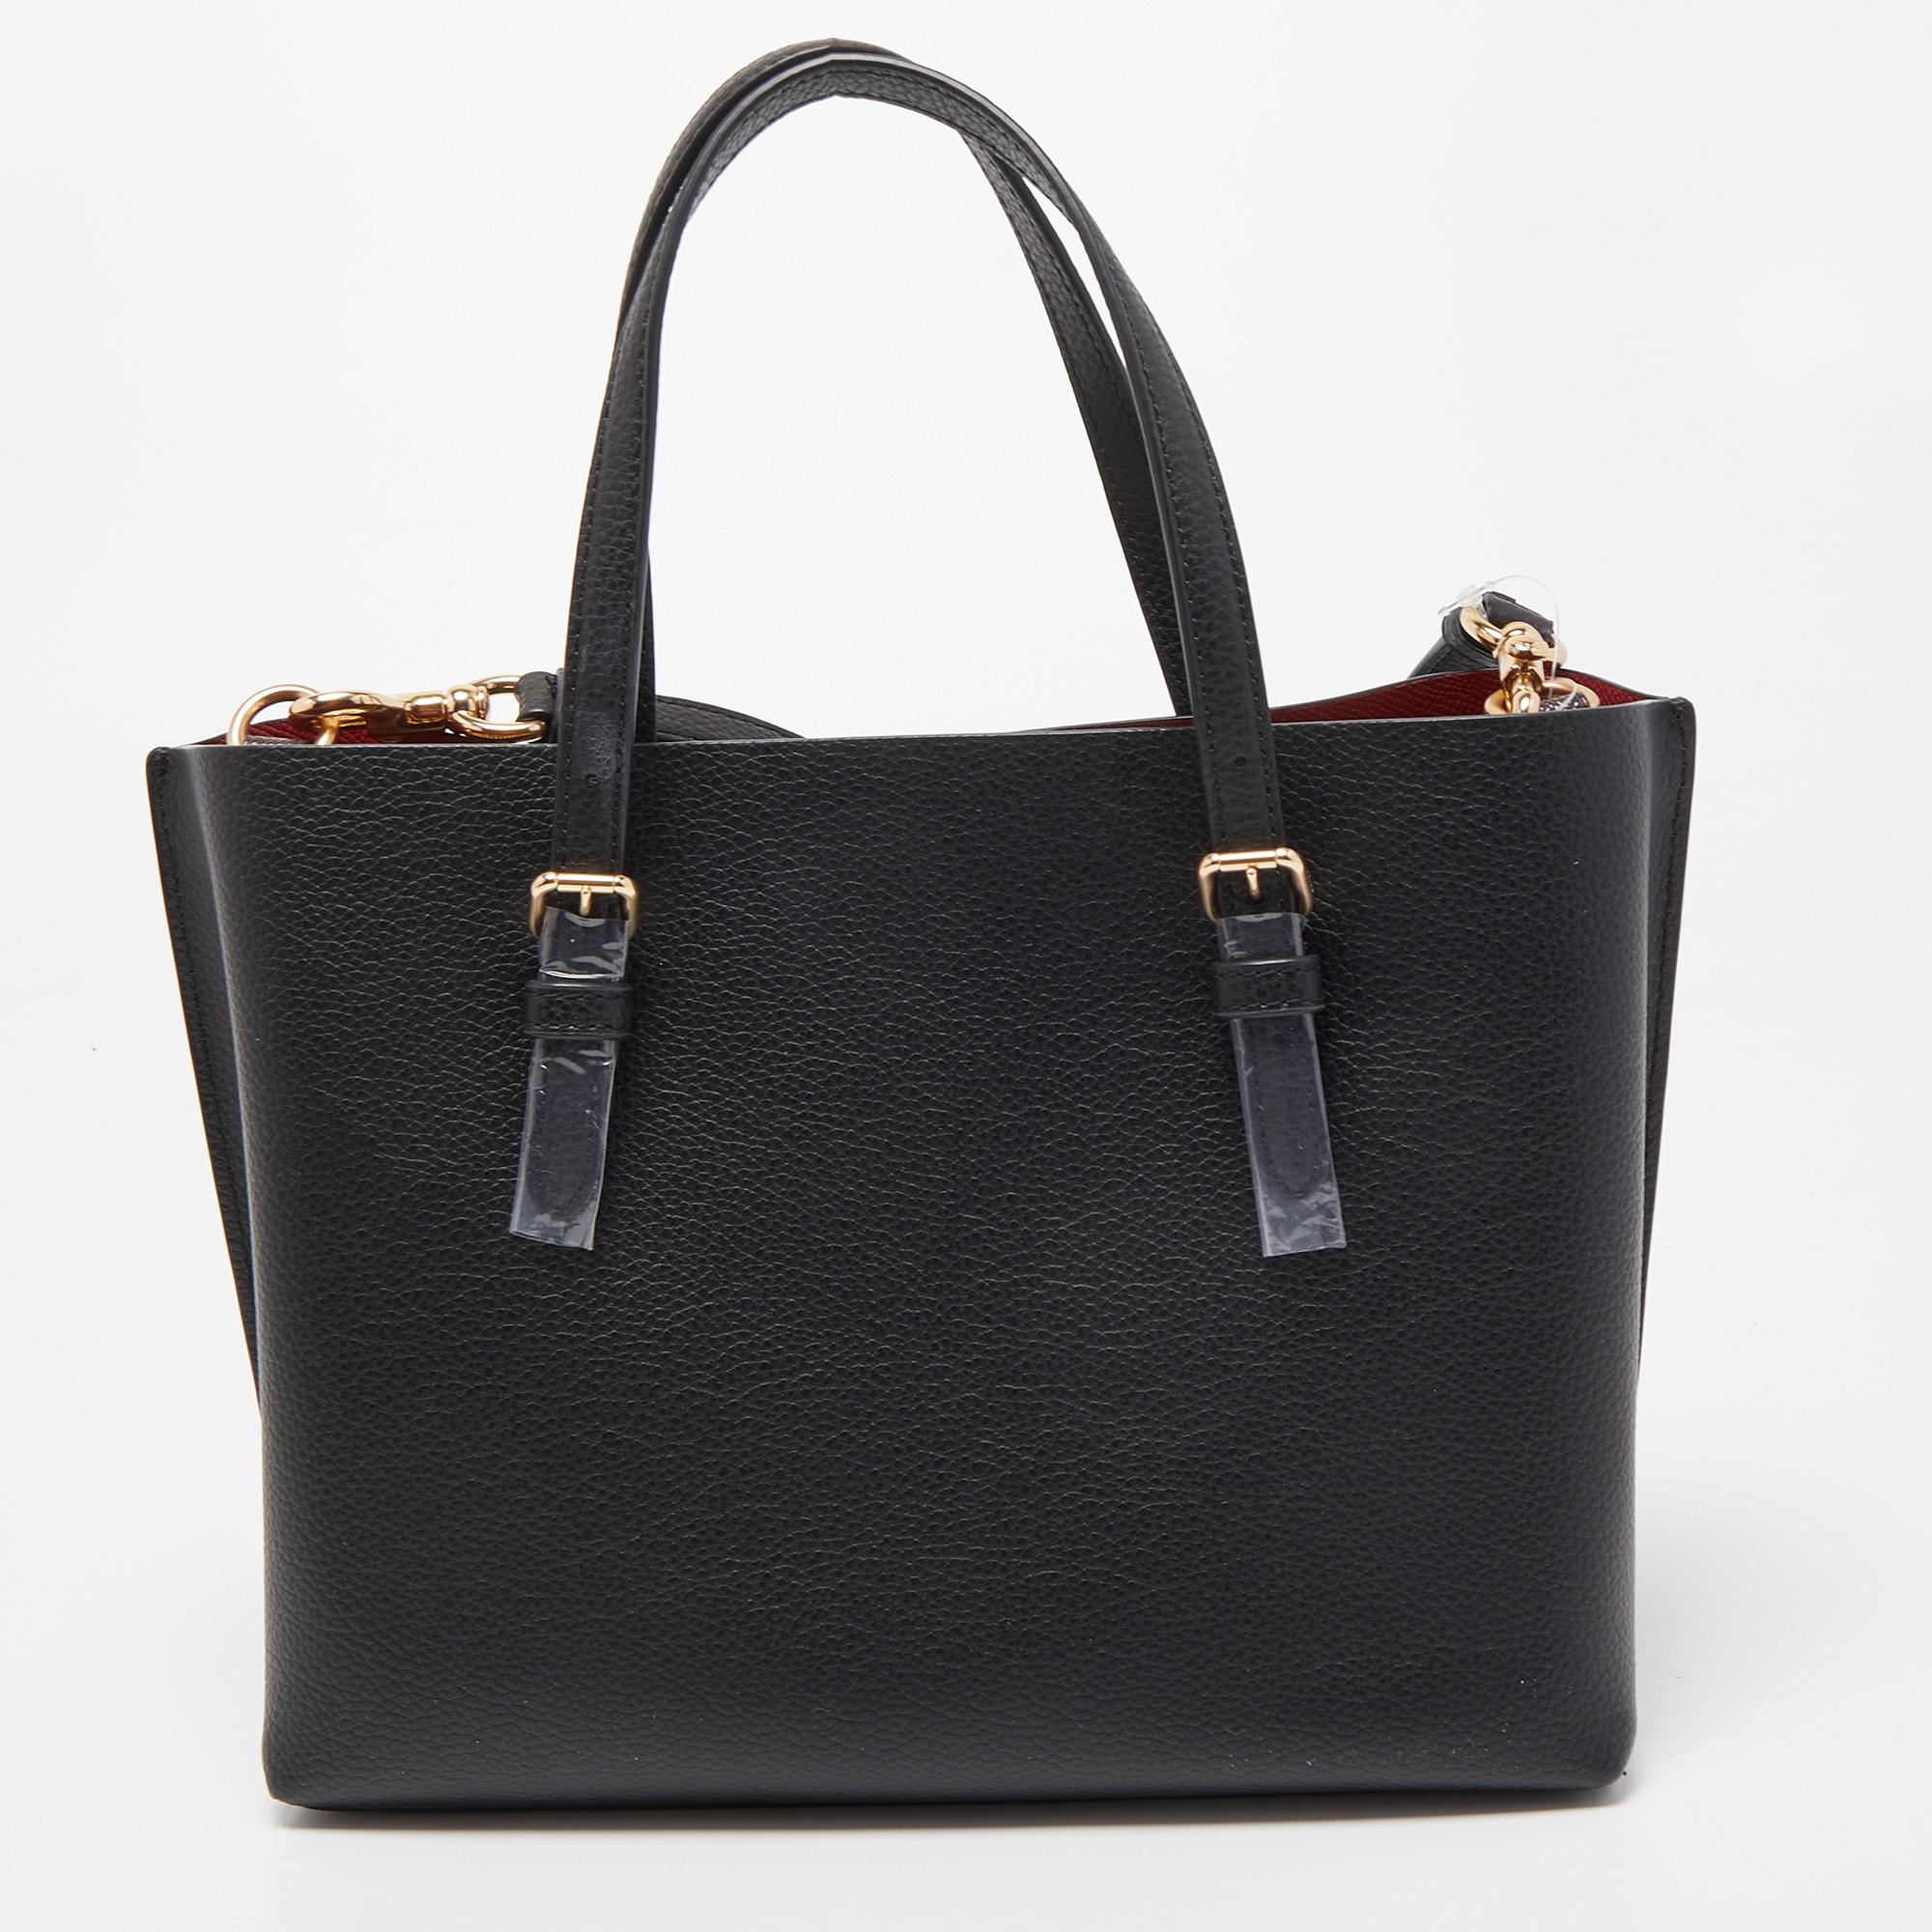 This beautiful Mollie tote from Coach is highly functional and full of charm. It is made using leather on the exterior with gold-toned hardware completing its fittings. It contains a study shape, dual handles, and a shoulder strap.

Includes: Info